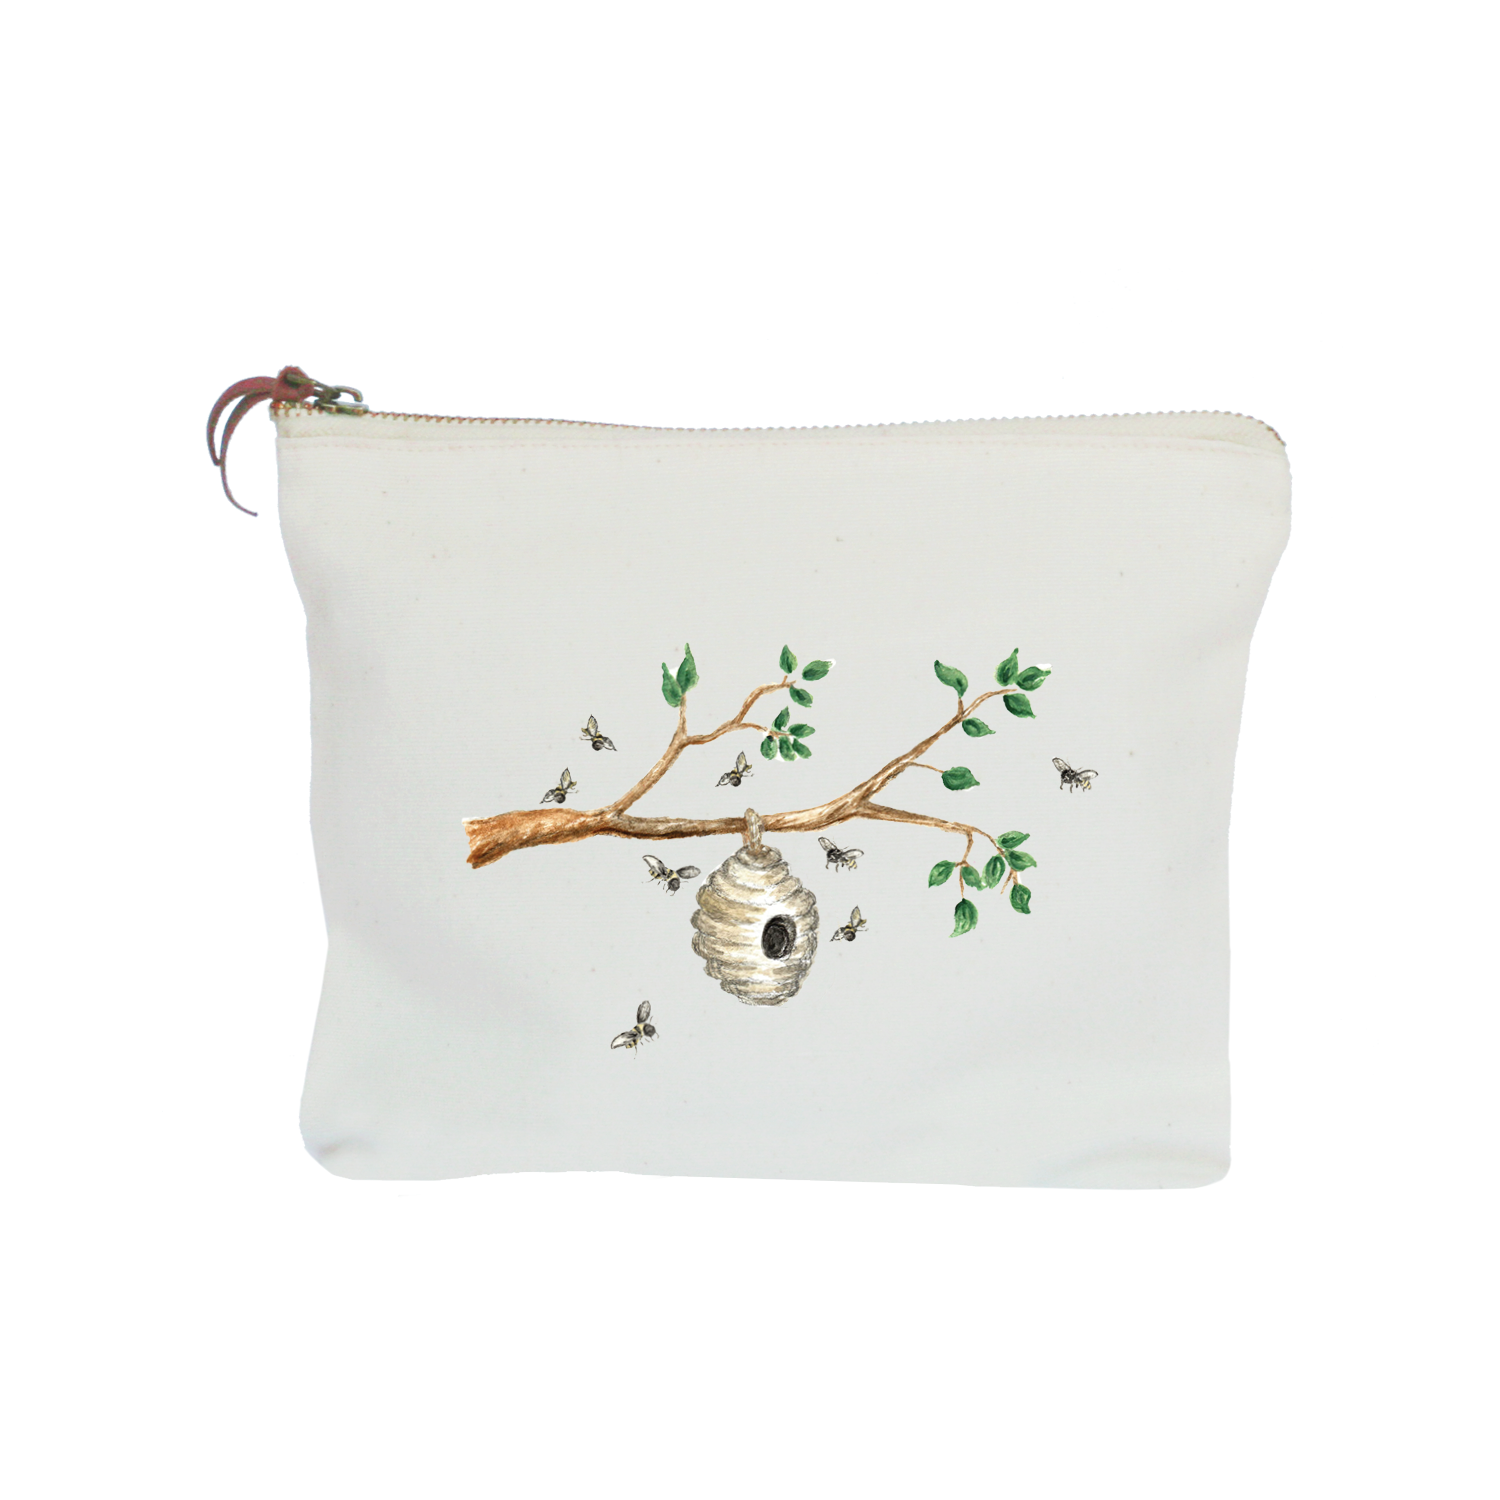 hive on branch with bees zipper pouch